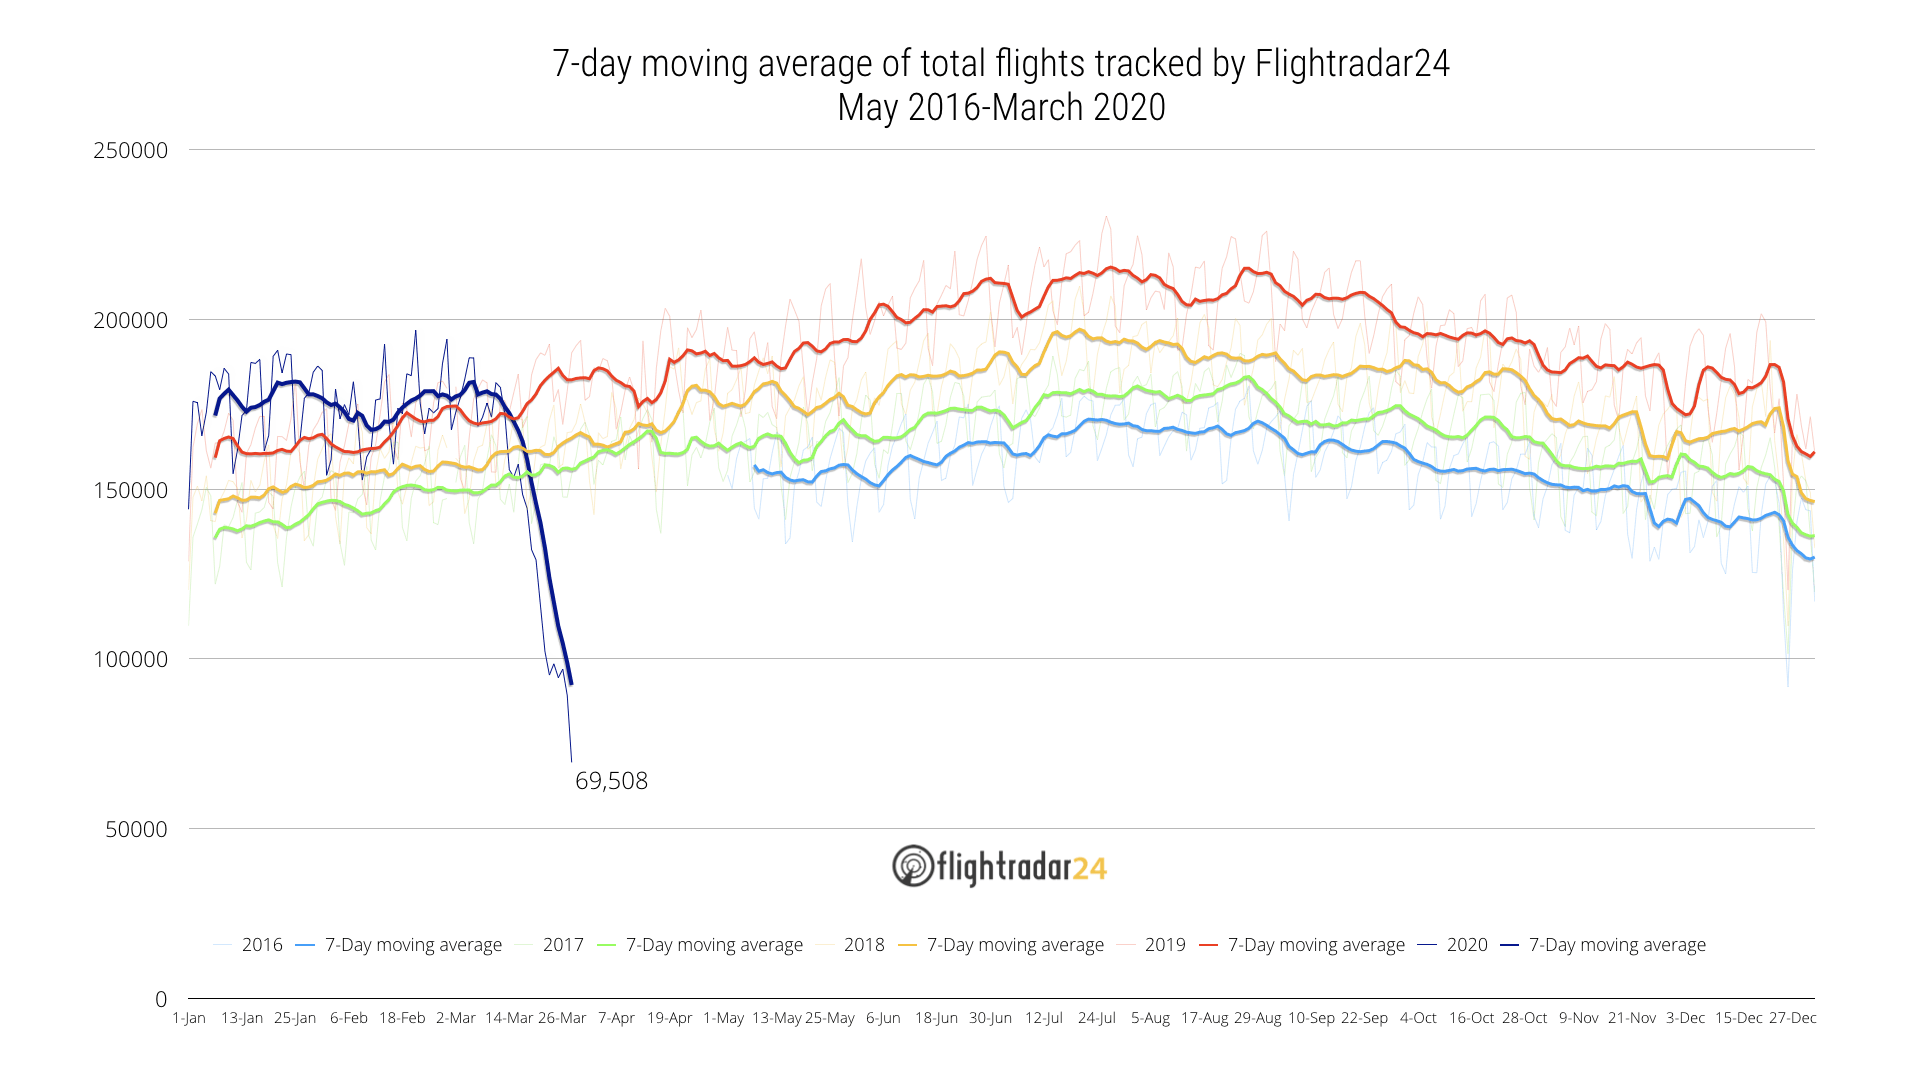 28 March 2020 Moving Average Total Traffic since 2016